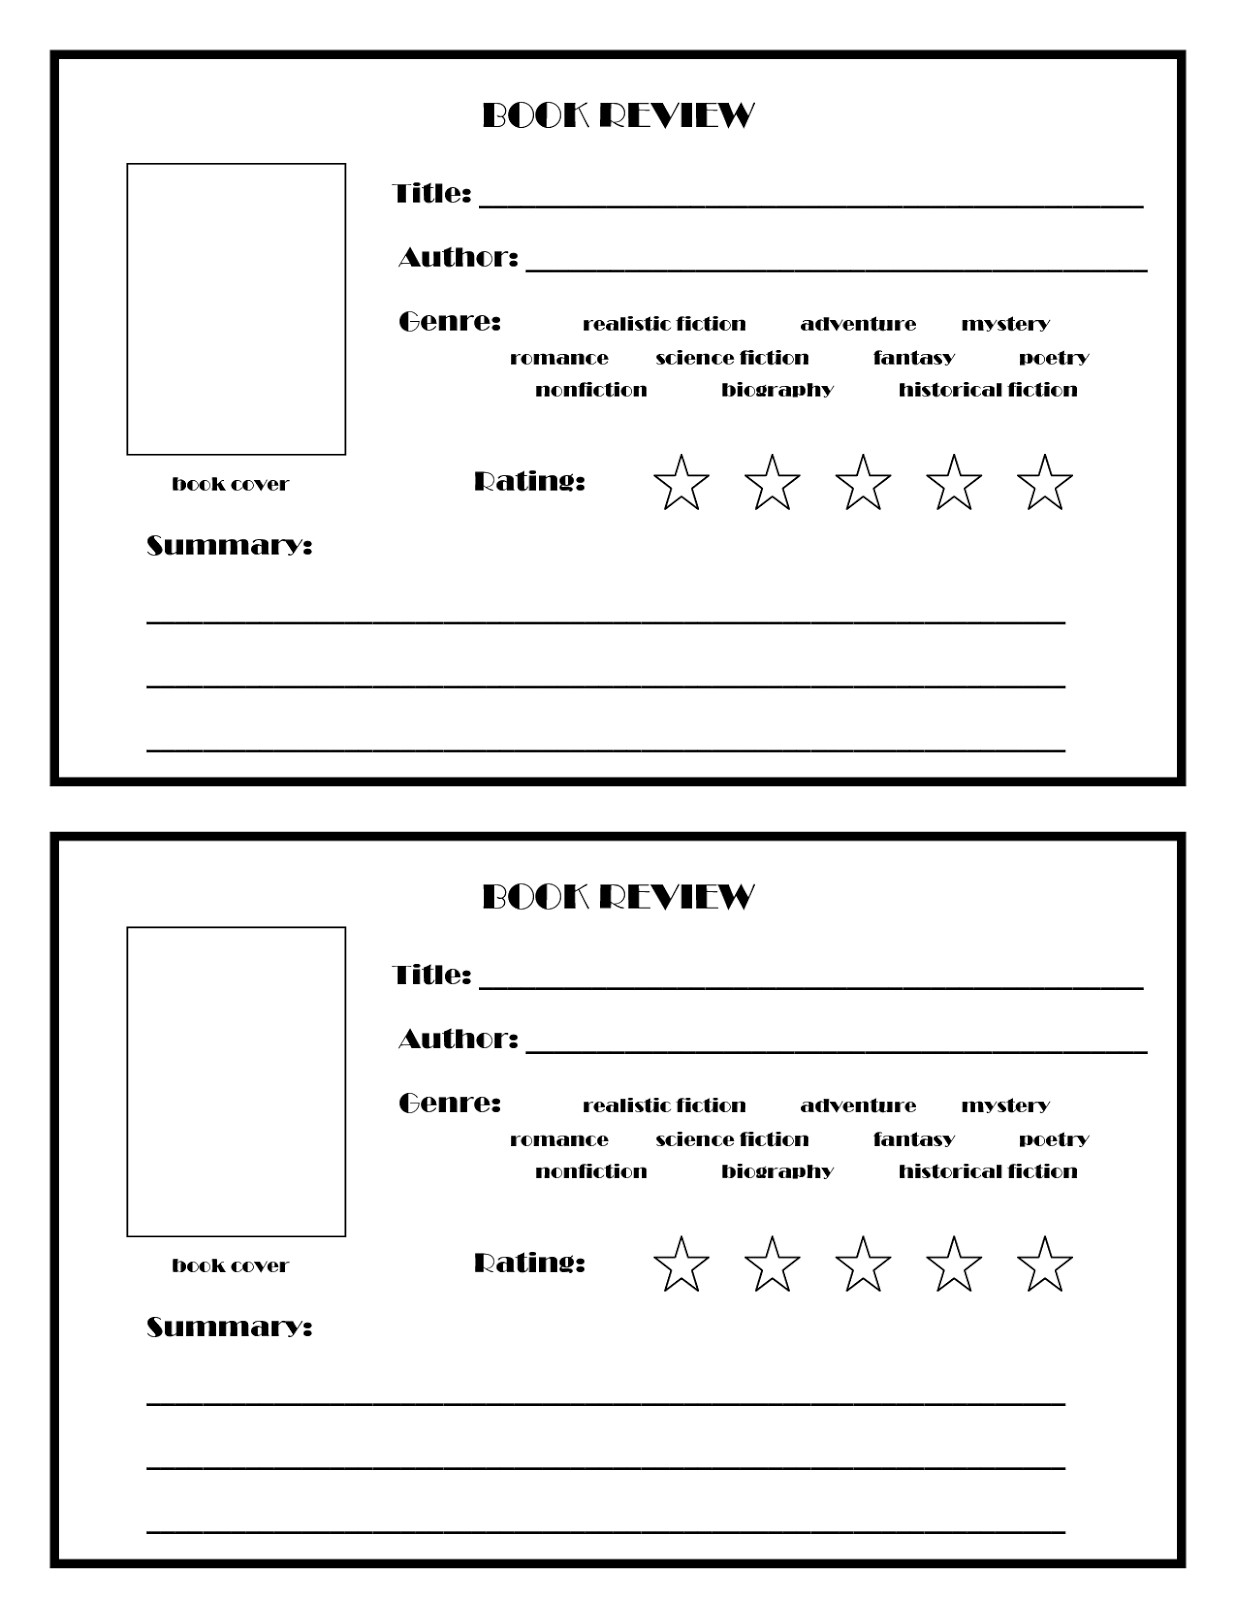 printable-book-review-forms-printable-forms-free-online